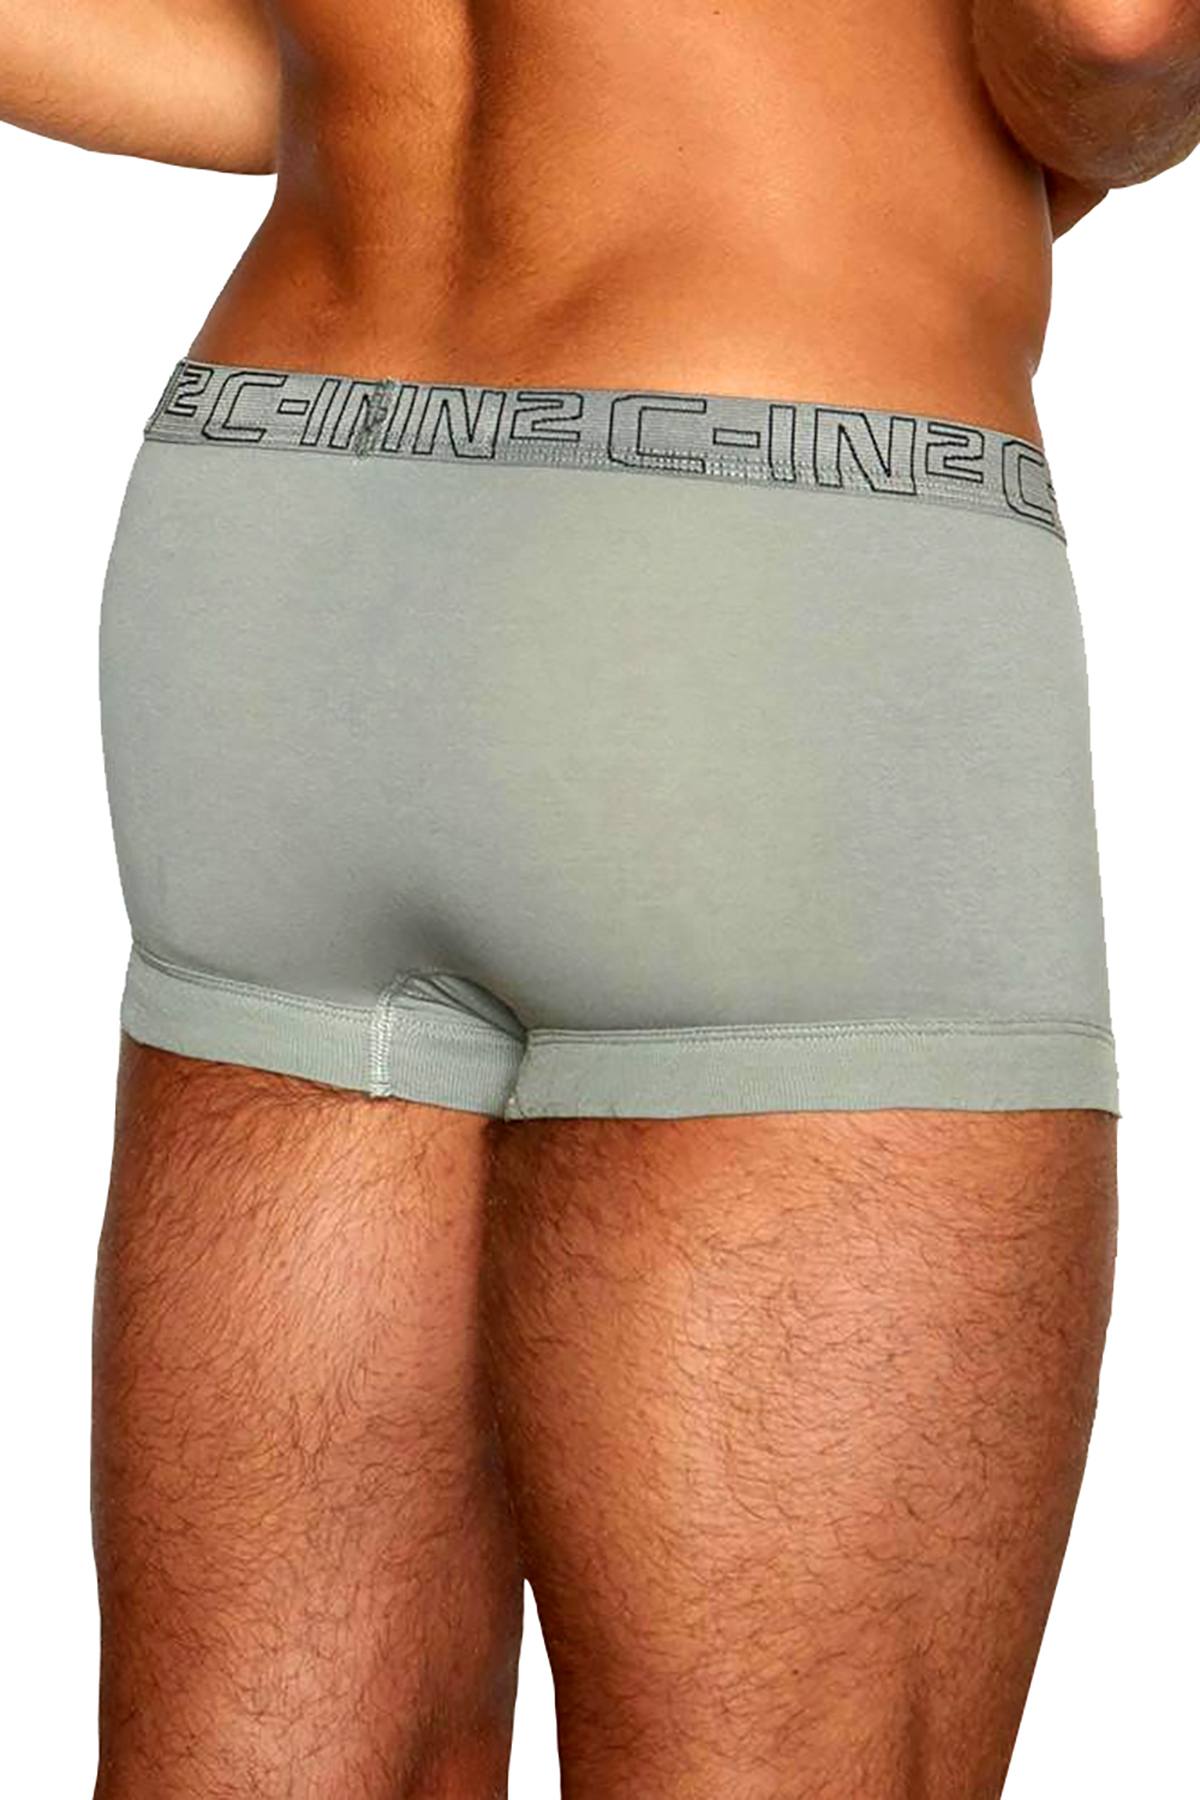 C-IN2 Cathedray-Grey/Celeste-Blue Trunk 2-Pack